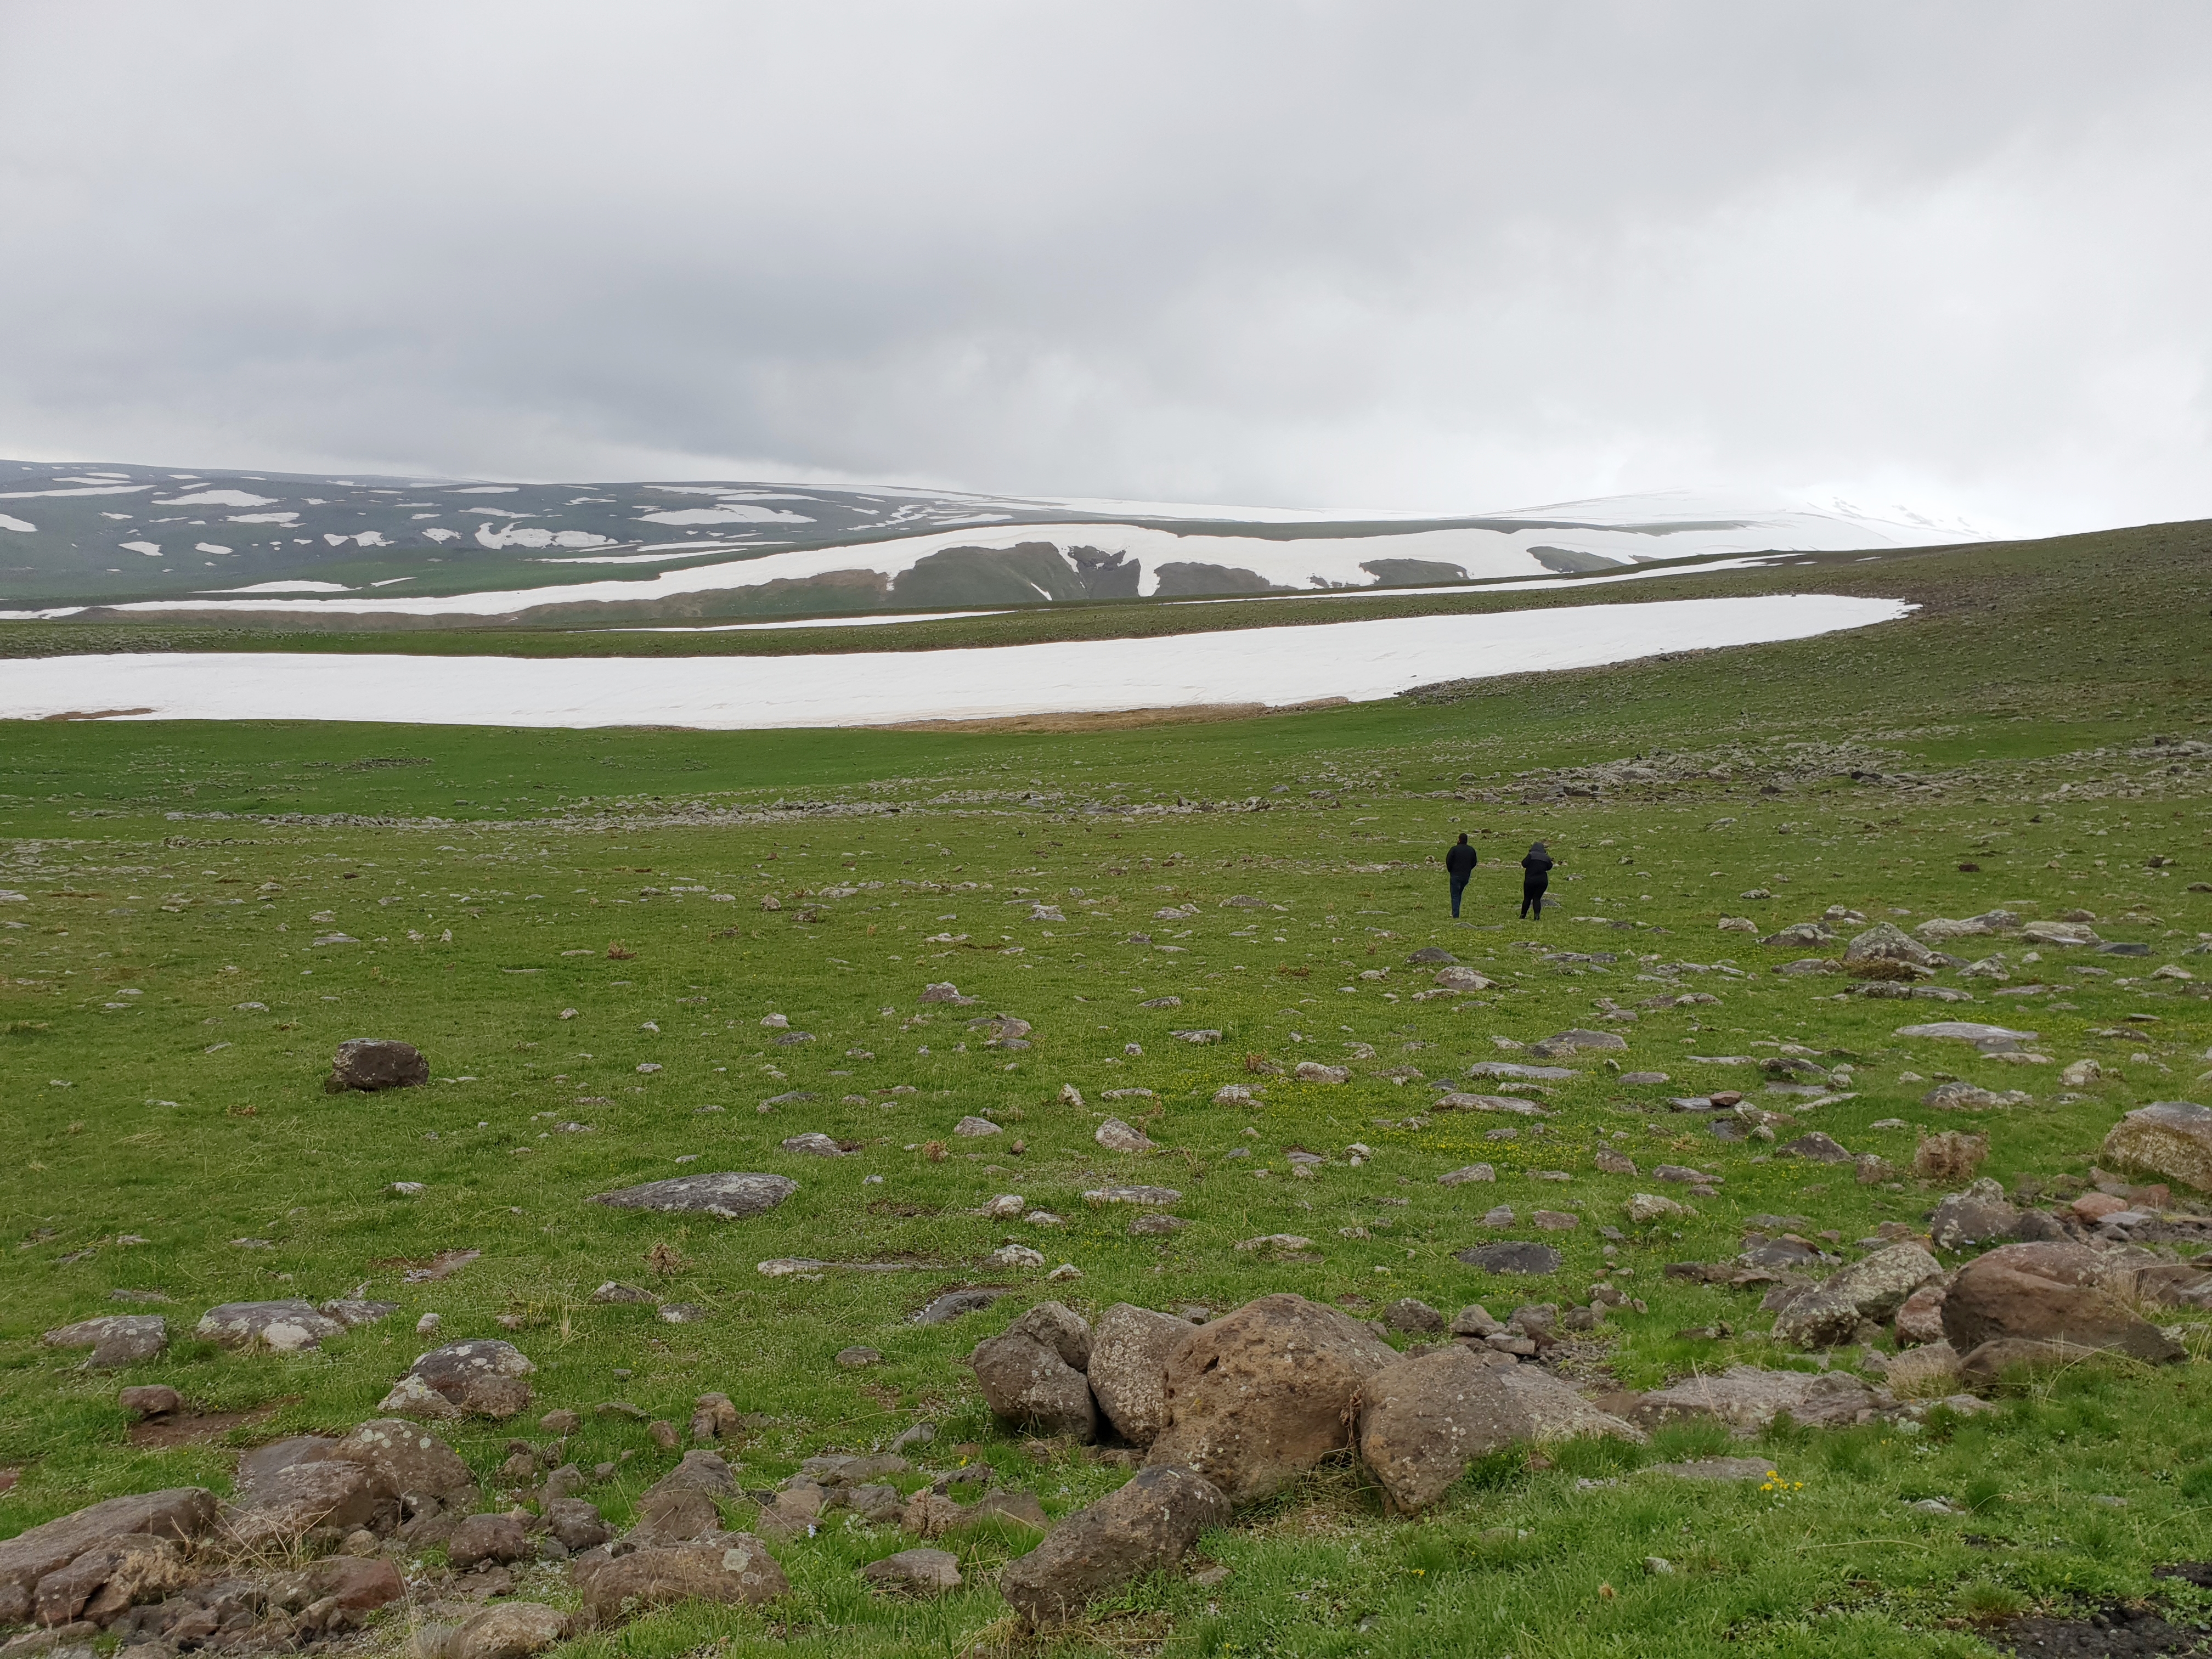 Hike to Mt. Aragats is the best hike in Armenia and also one of the most fun things to do in Armenia